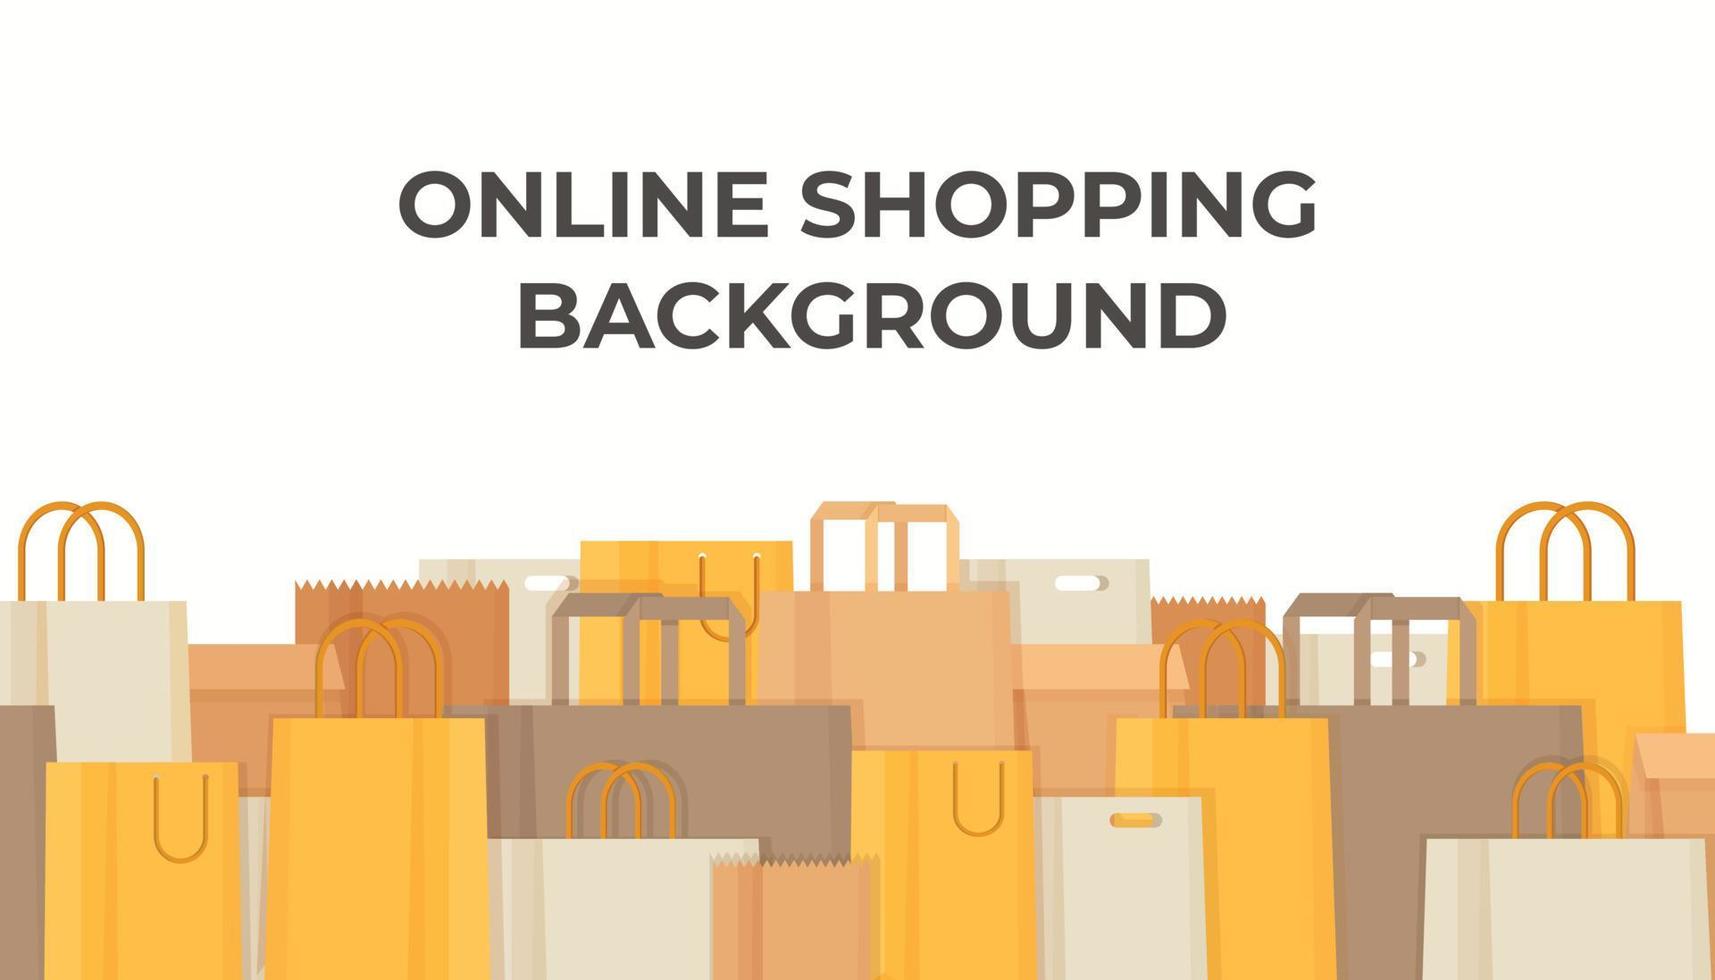 Vector illustration of online shopping and purchasing.